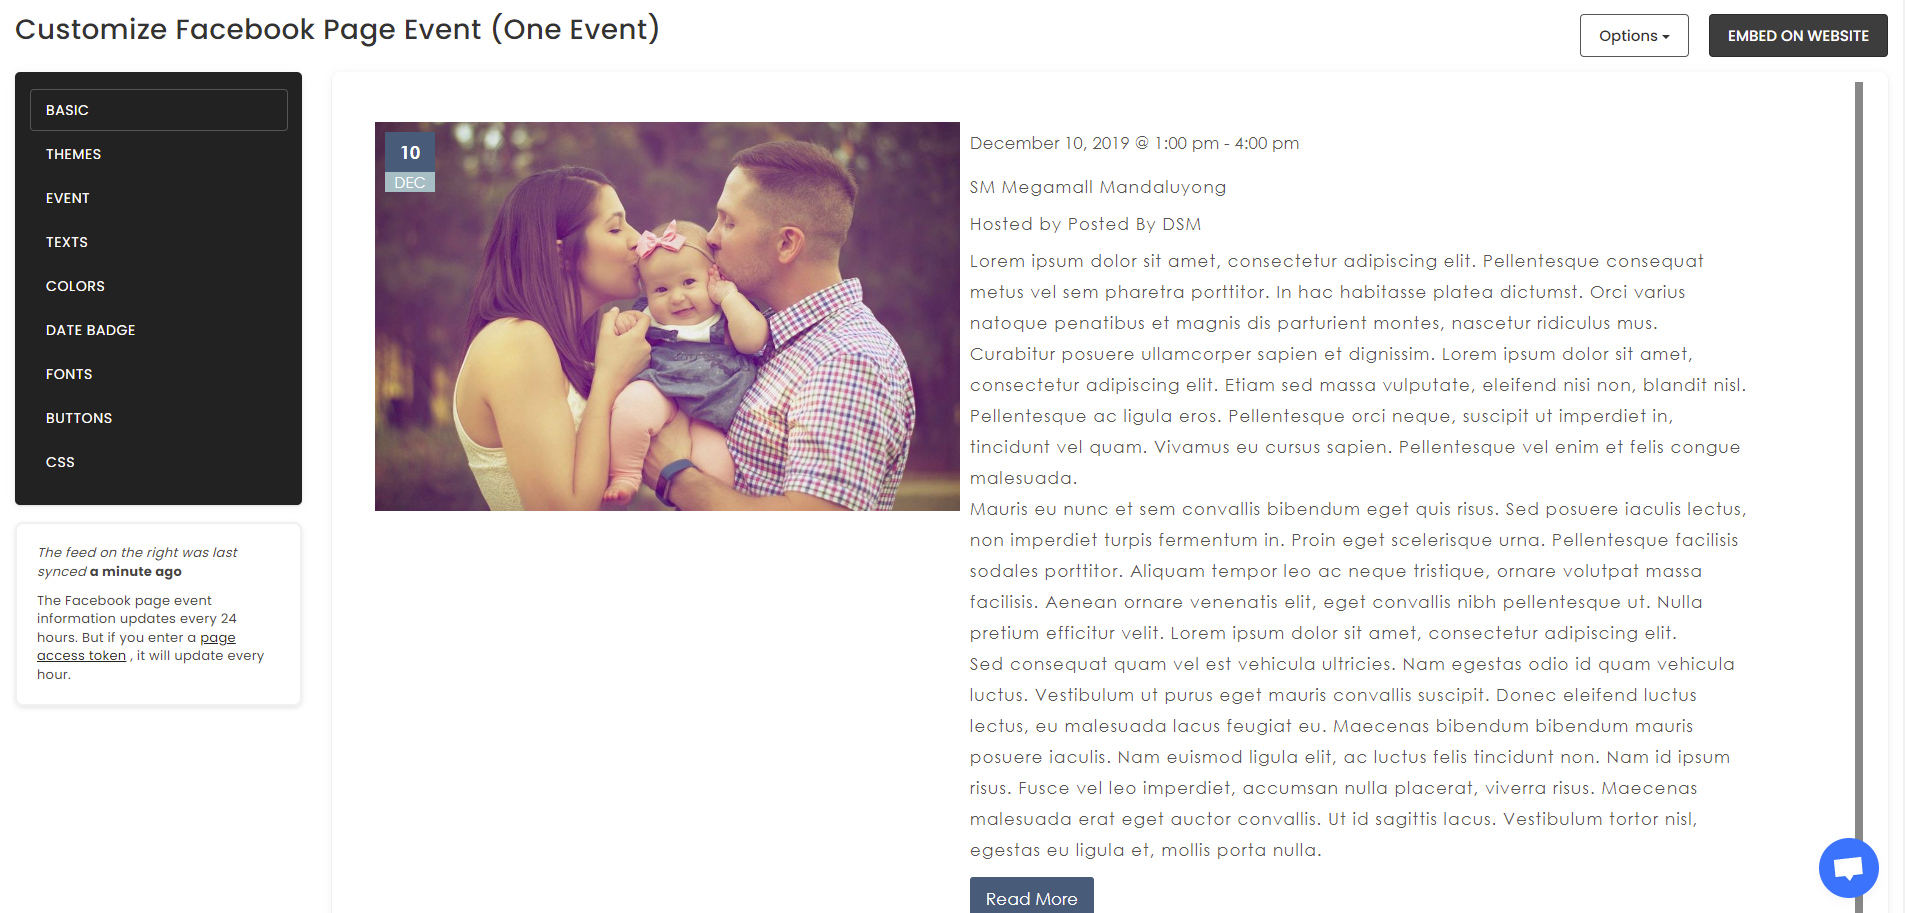 Customize your feed - How To Embed Facebook Page Event (One Event) On Wordpress Website For Free?